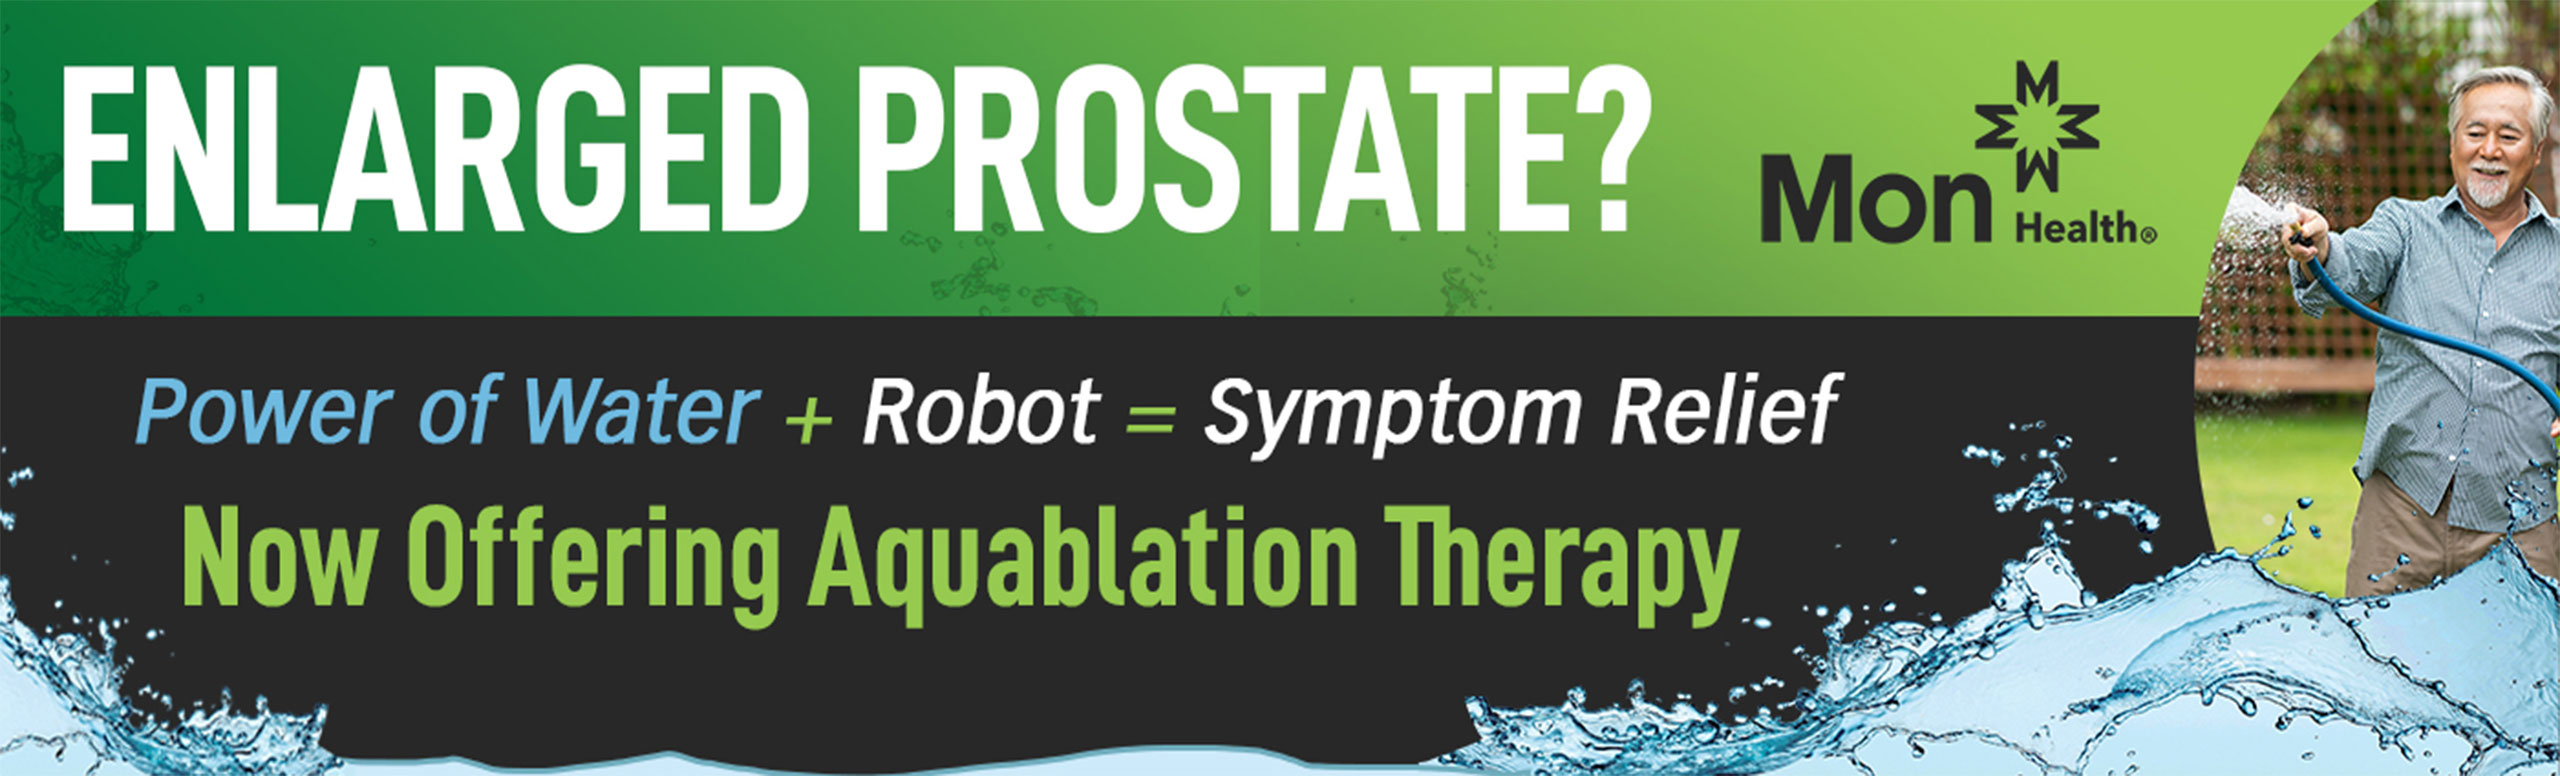 Banner picture of a man  standing outside with a hose, watering his grass. Banner says:

ENLARGED PROSTATE?
Power of Water + Robot = Symptom Relief
Now Offering Aquablation Therapy